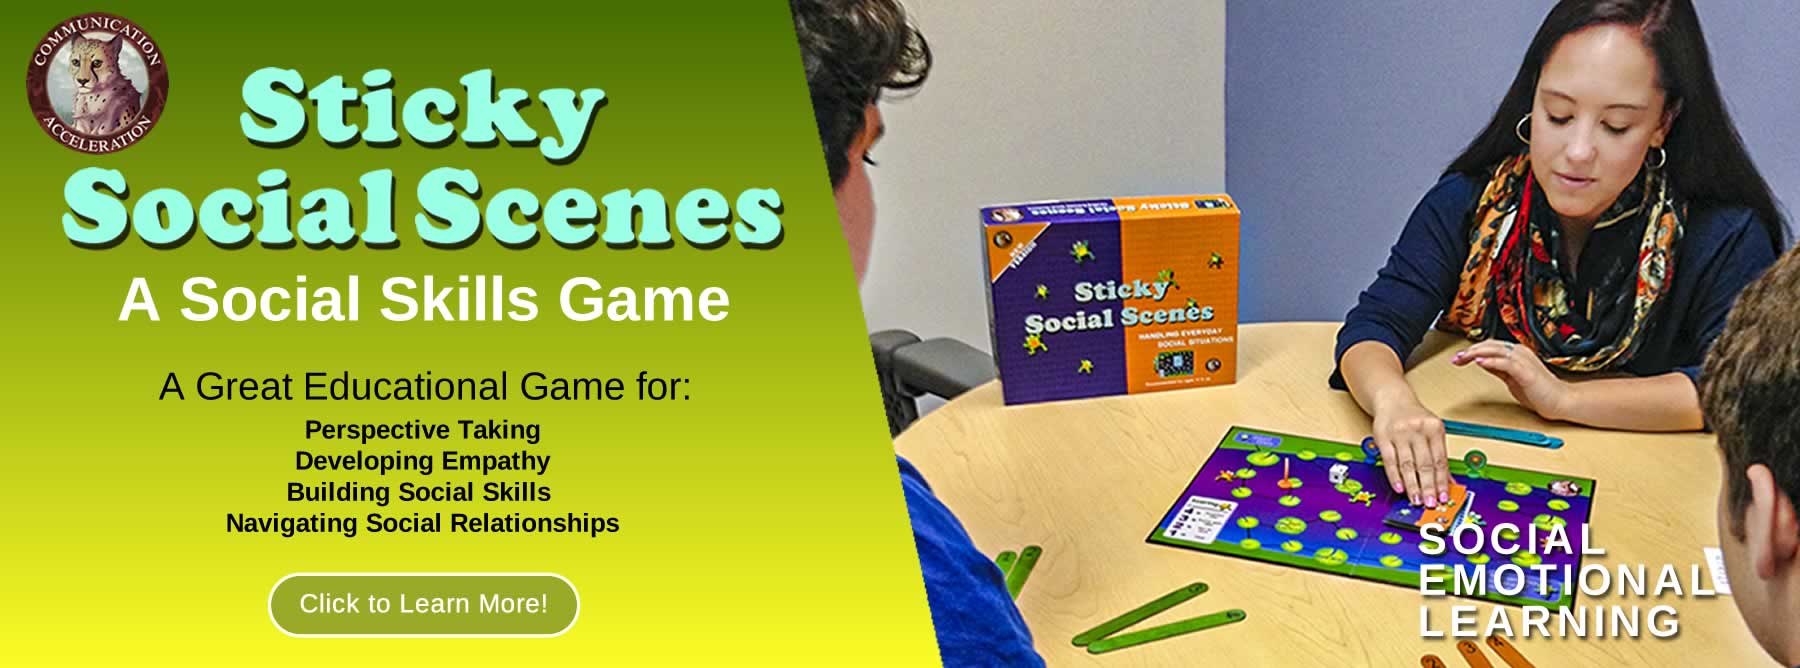 Sticky Social Scenes - Social skills game being played - 1800px wide